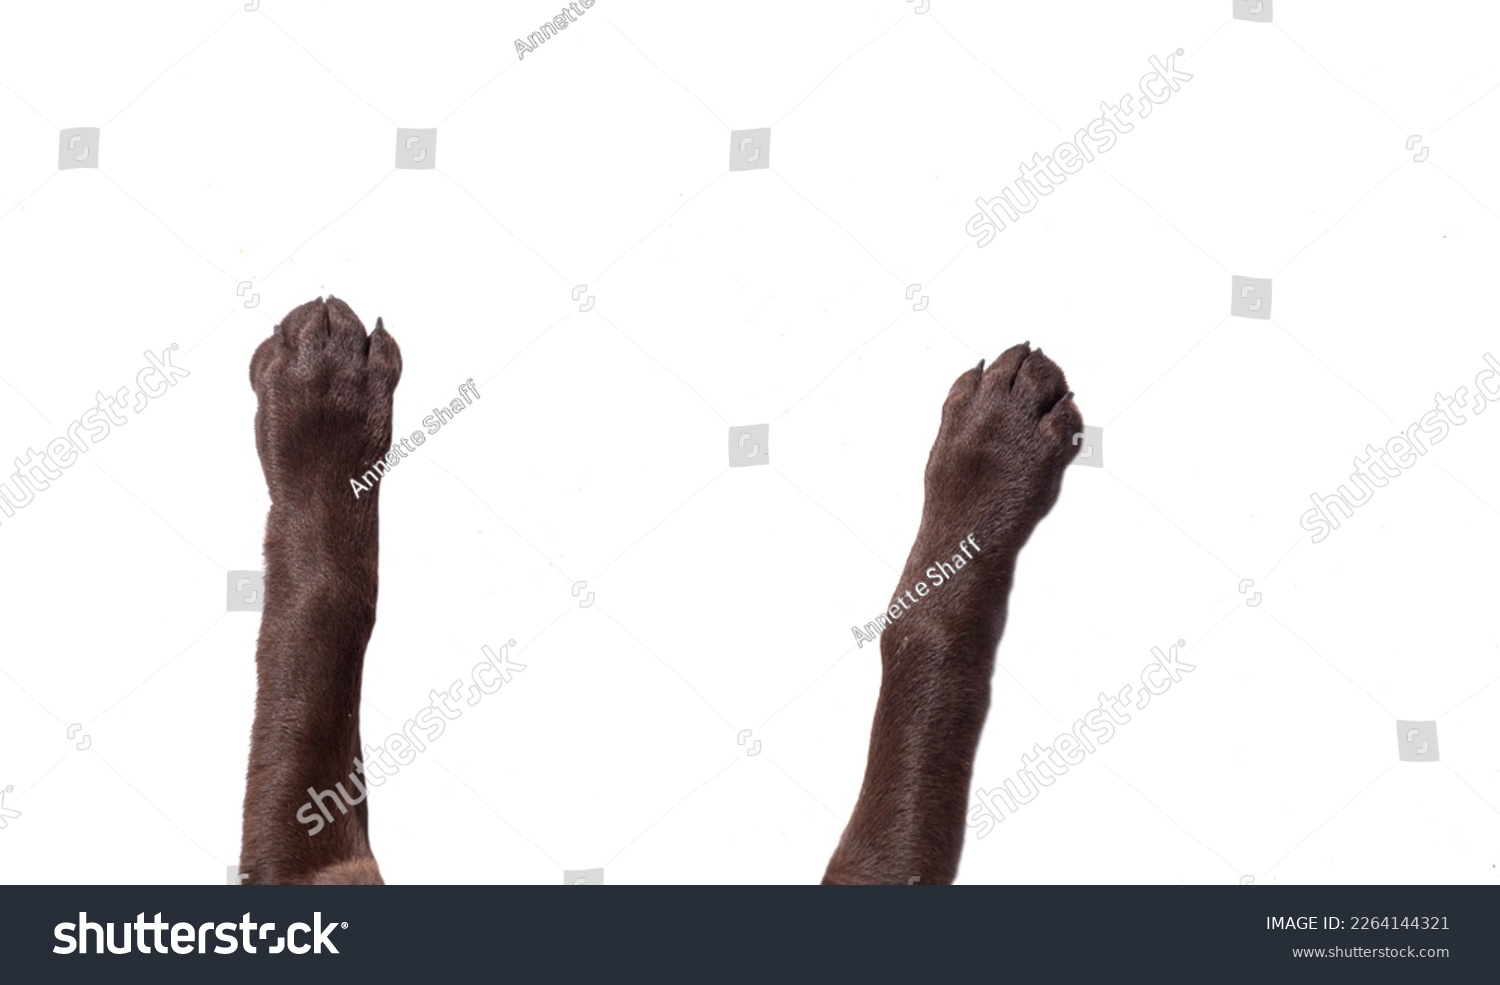 top view of dog legs sprawled out on an isolated white background #2264144321